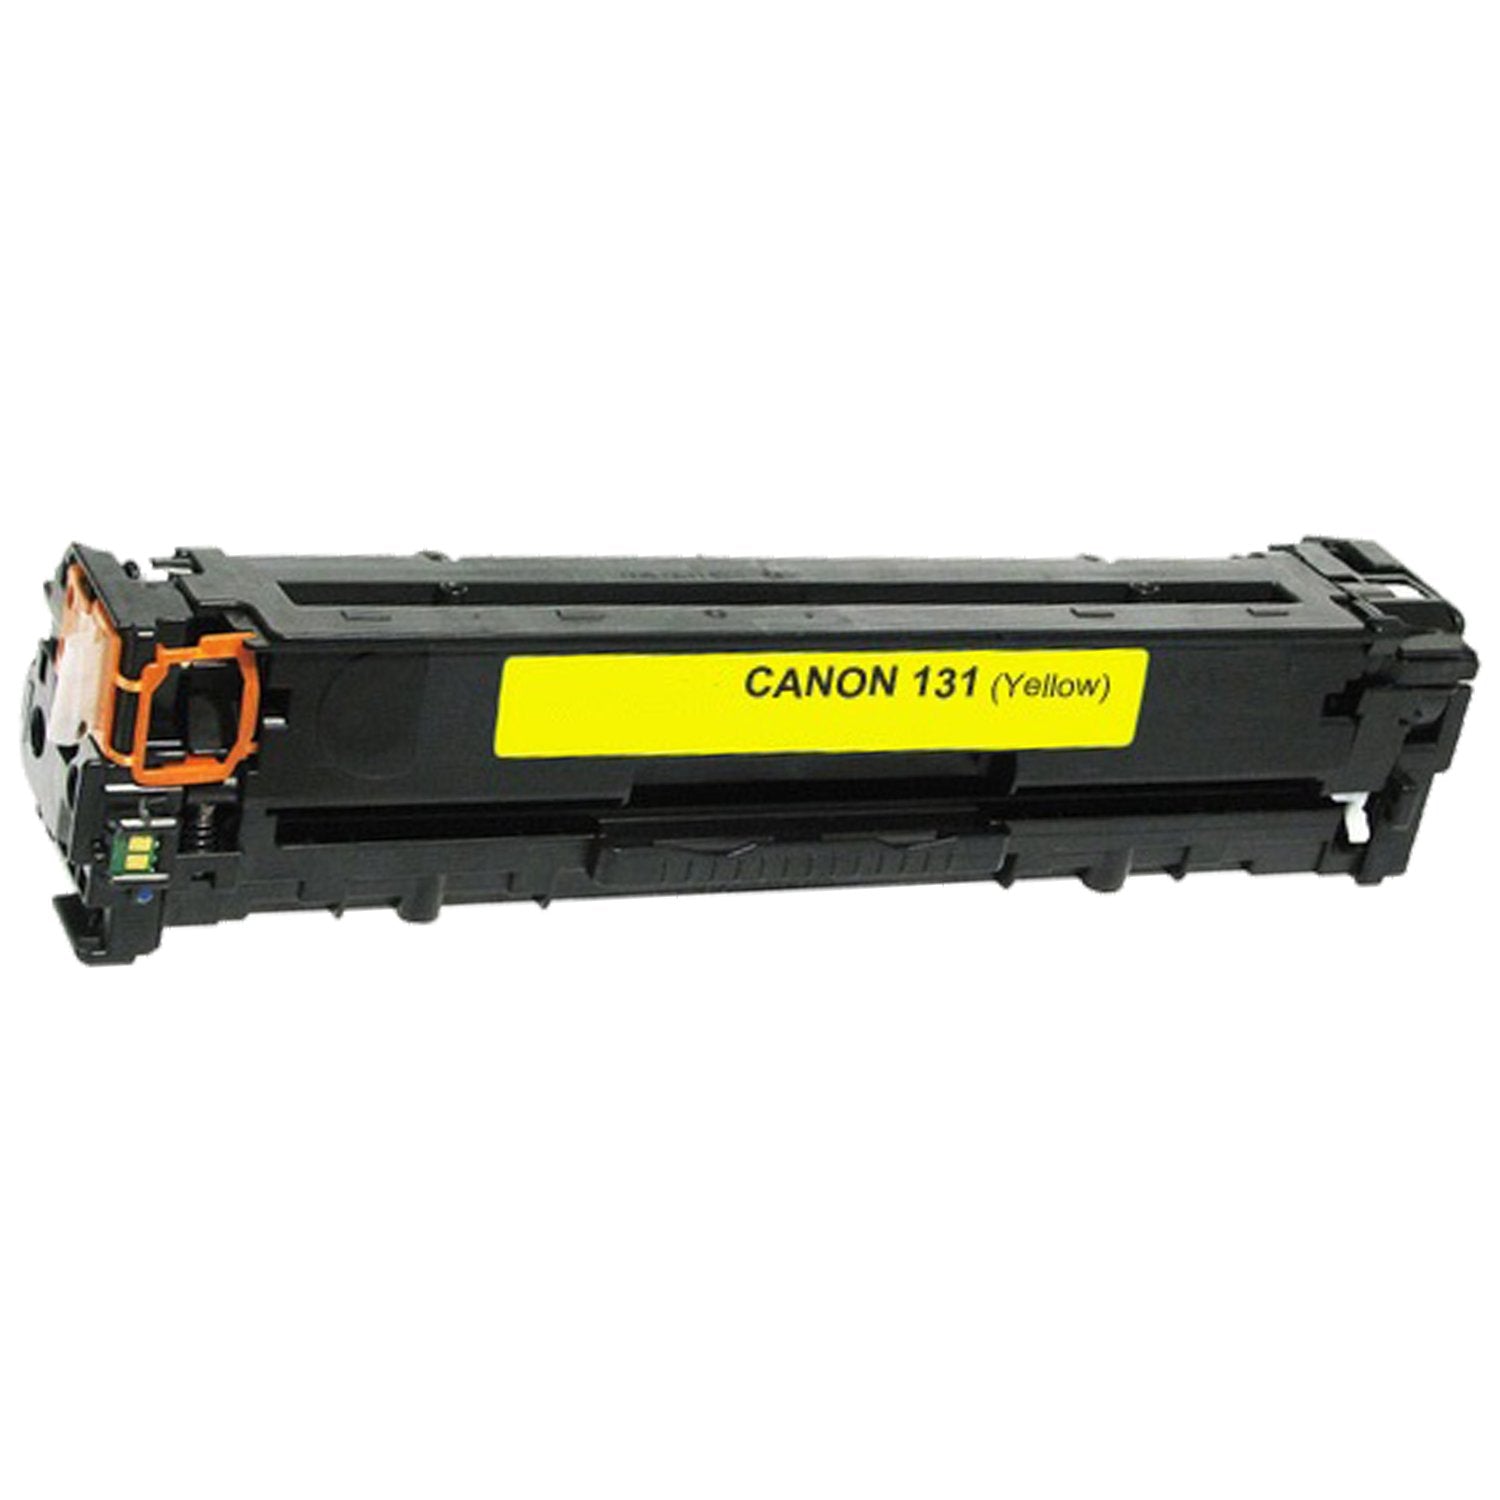 Absolute Toner Compatible Canon 131 Yellow Toner Cartridge | Absolute Toner Canon Toner Cartridges